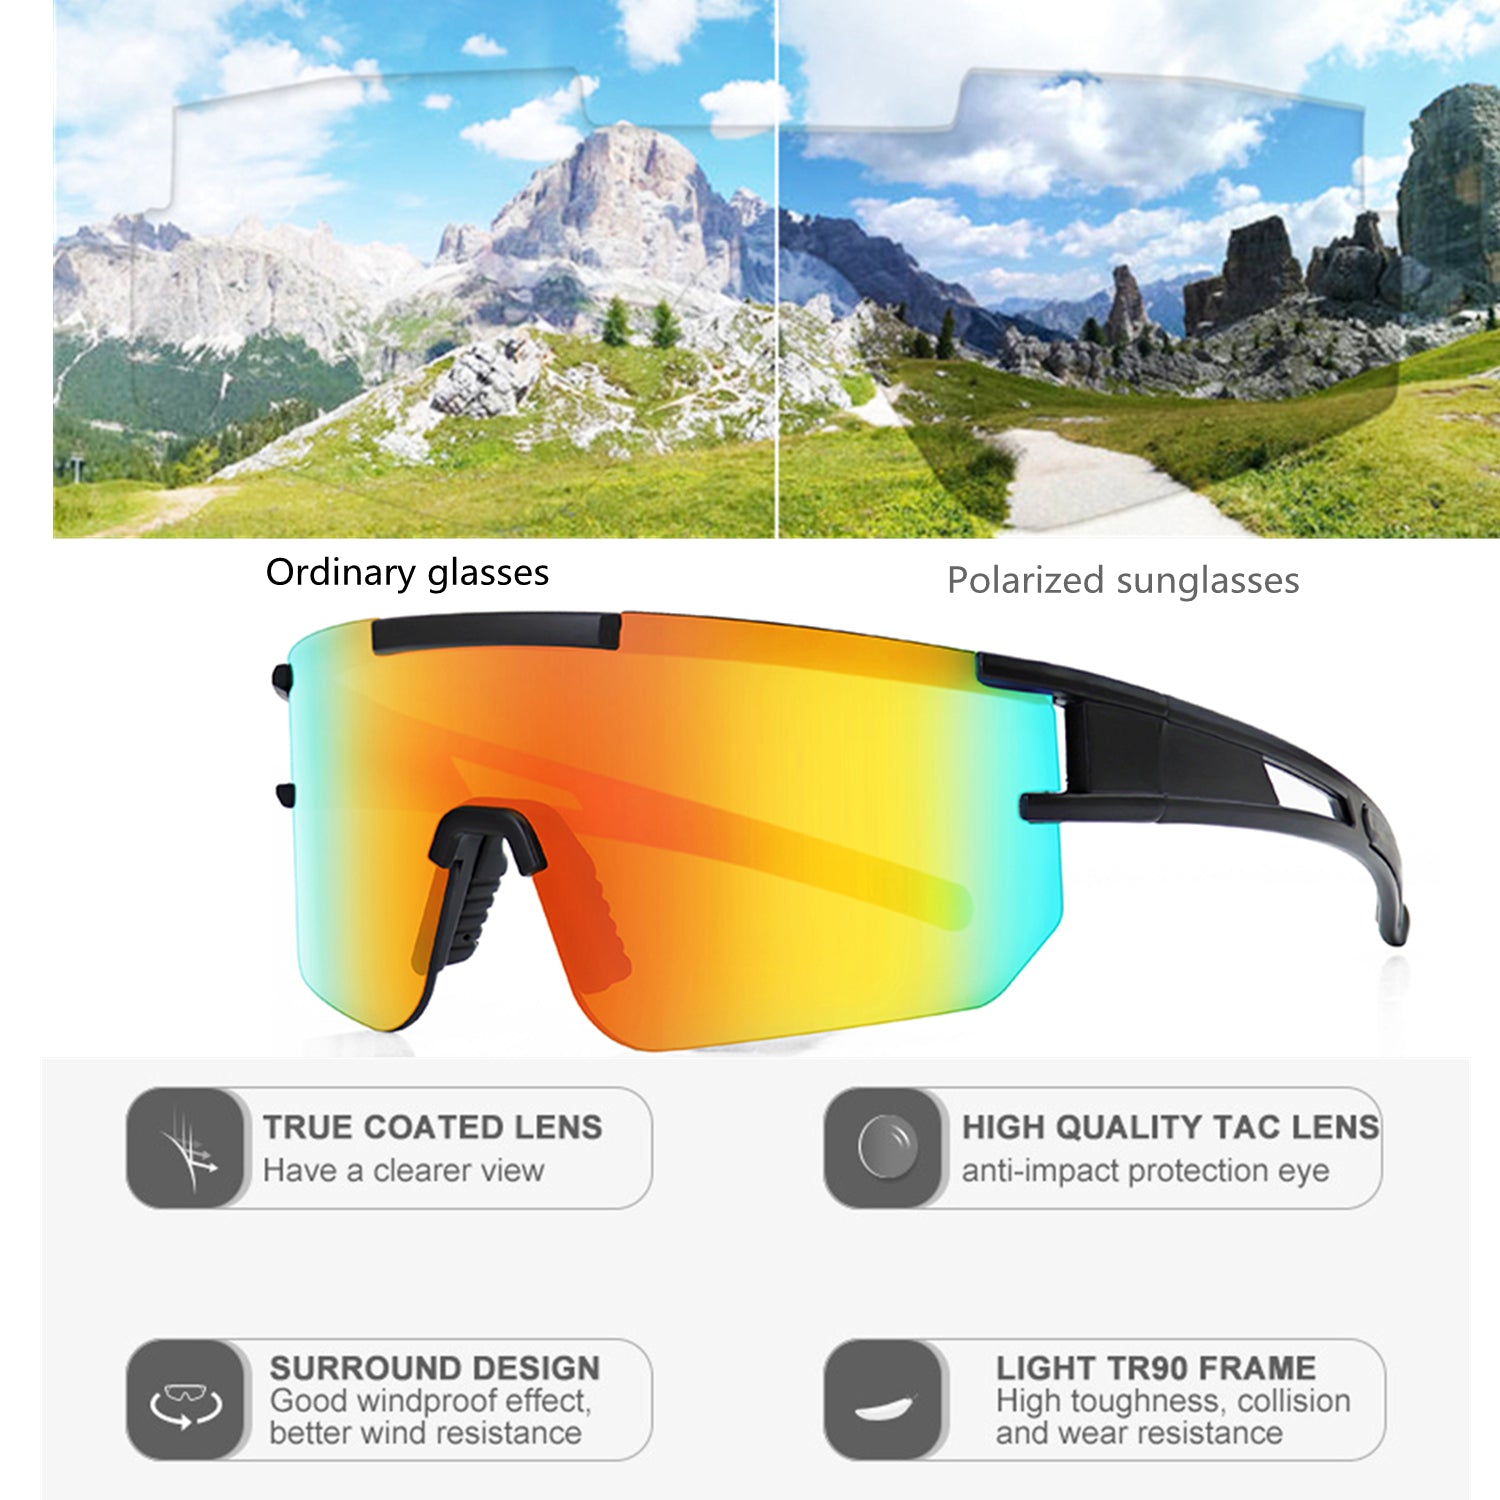 Polarized Sunglasses For Men And Women TR90 Frame Sun Glasses UV Protection For Cycling Fishing Running Golf Outdoor Sports